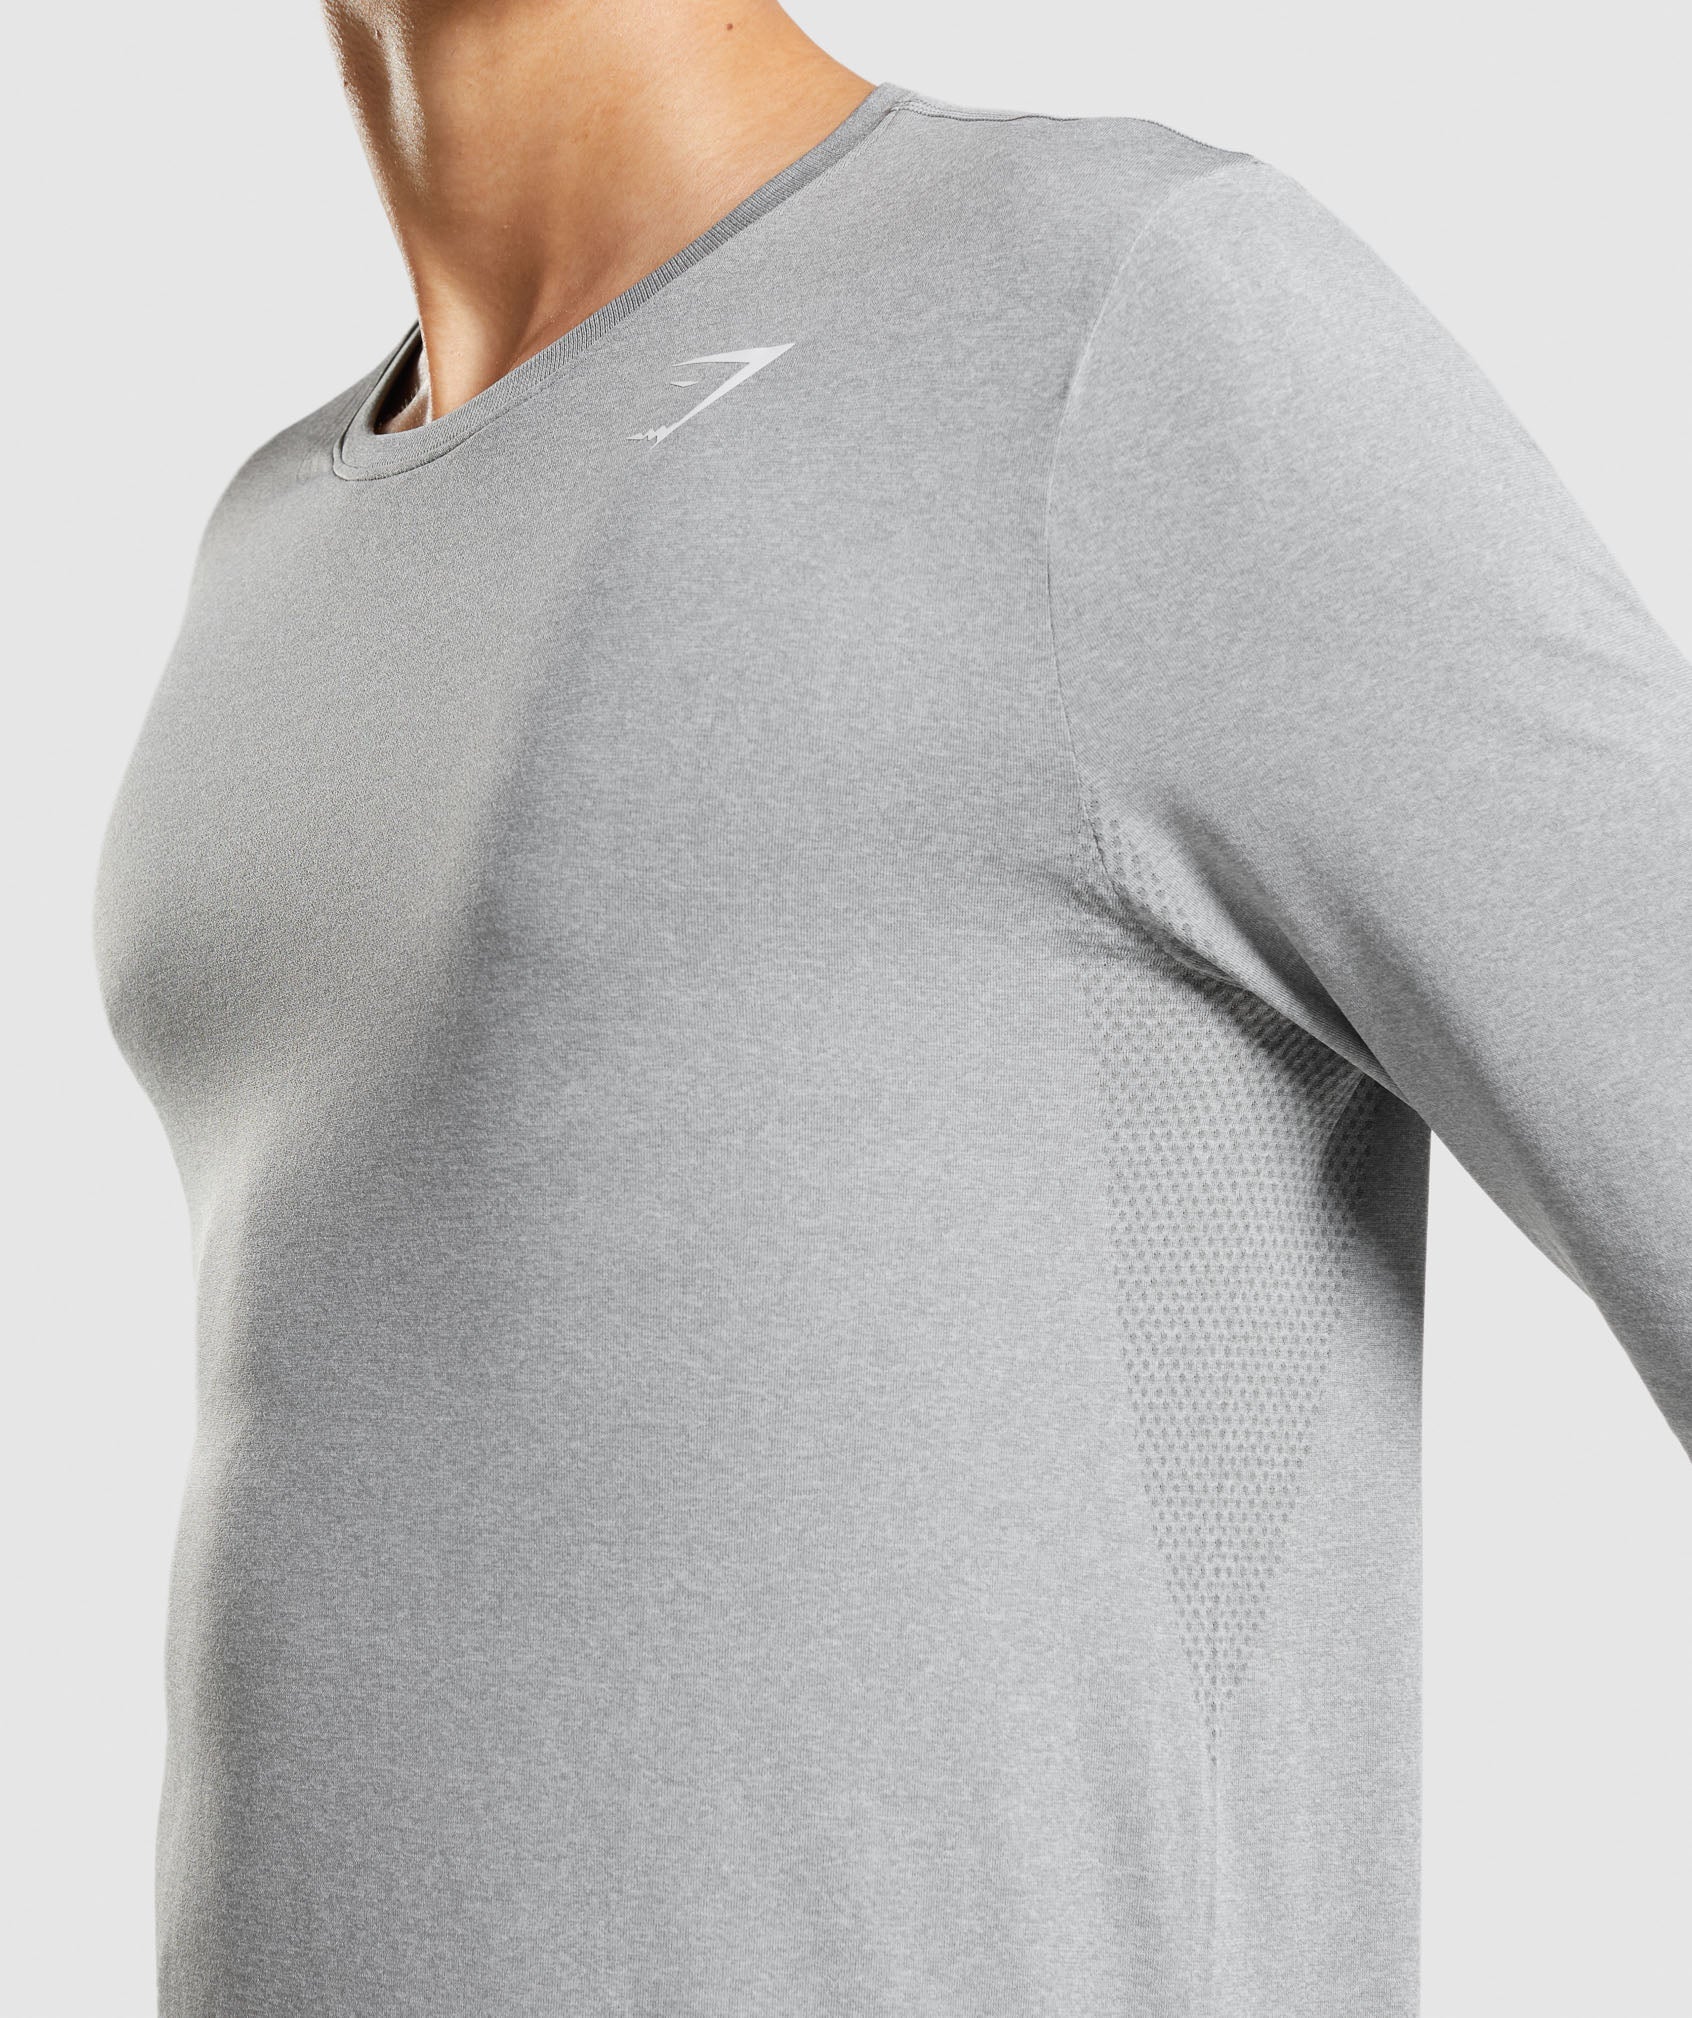 Arrival Seamless Long Sleeve T-Shirt in Grey - view 6